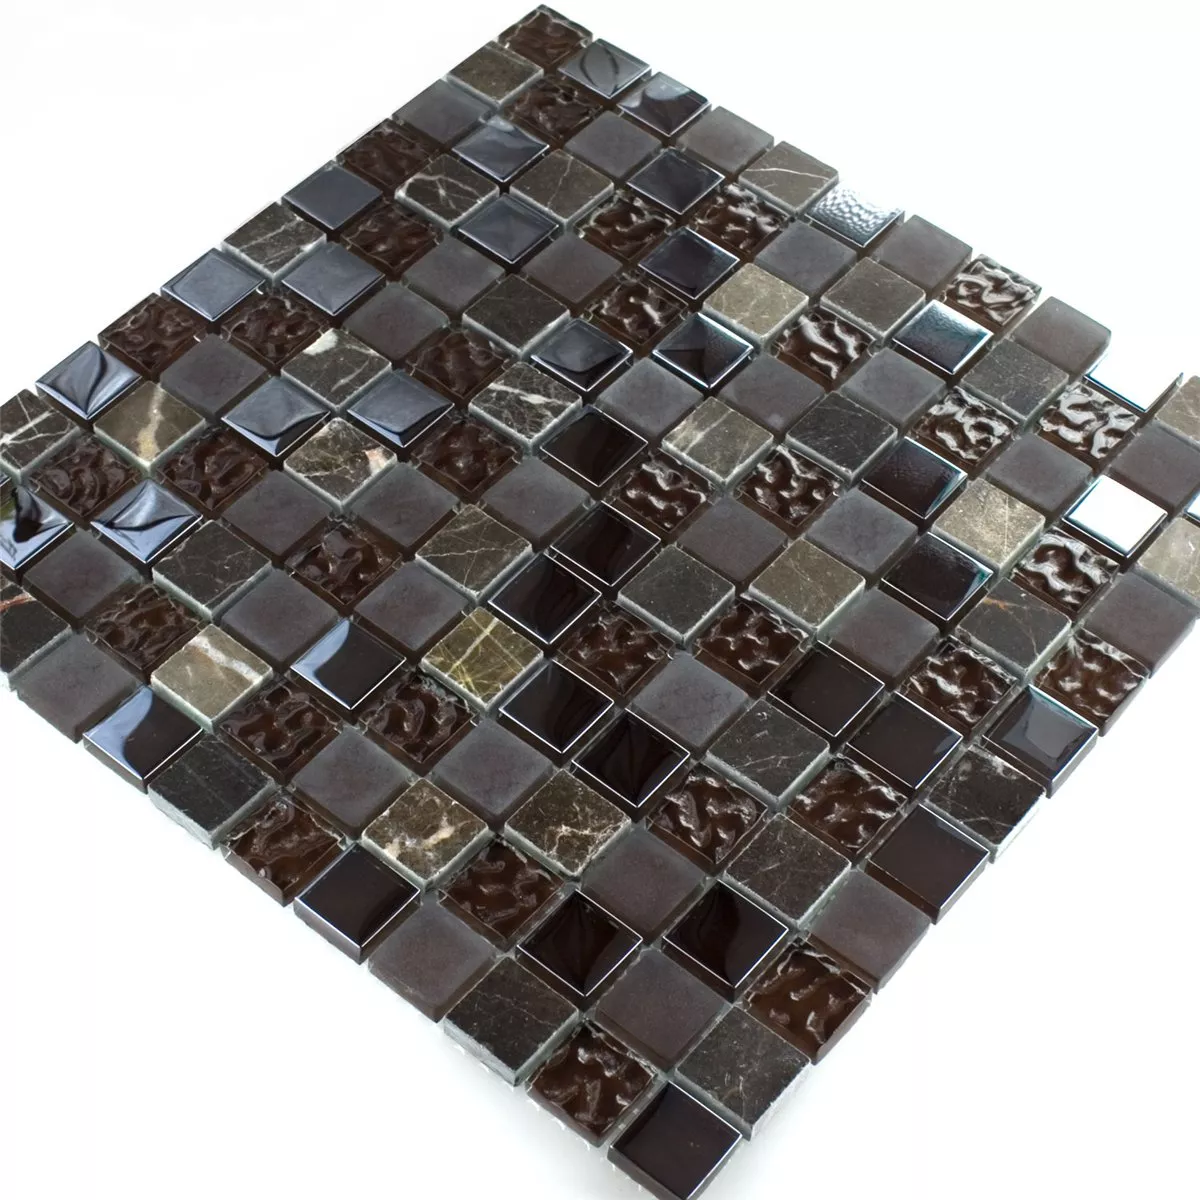 Sample Mosaic Tiles Glass Marble Mix Sintra Brown 